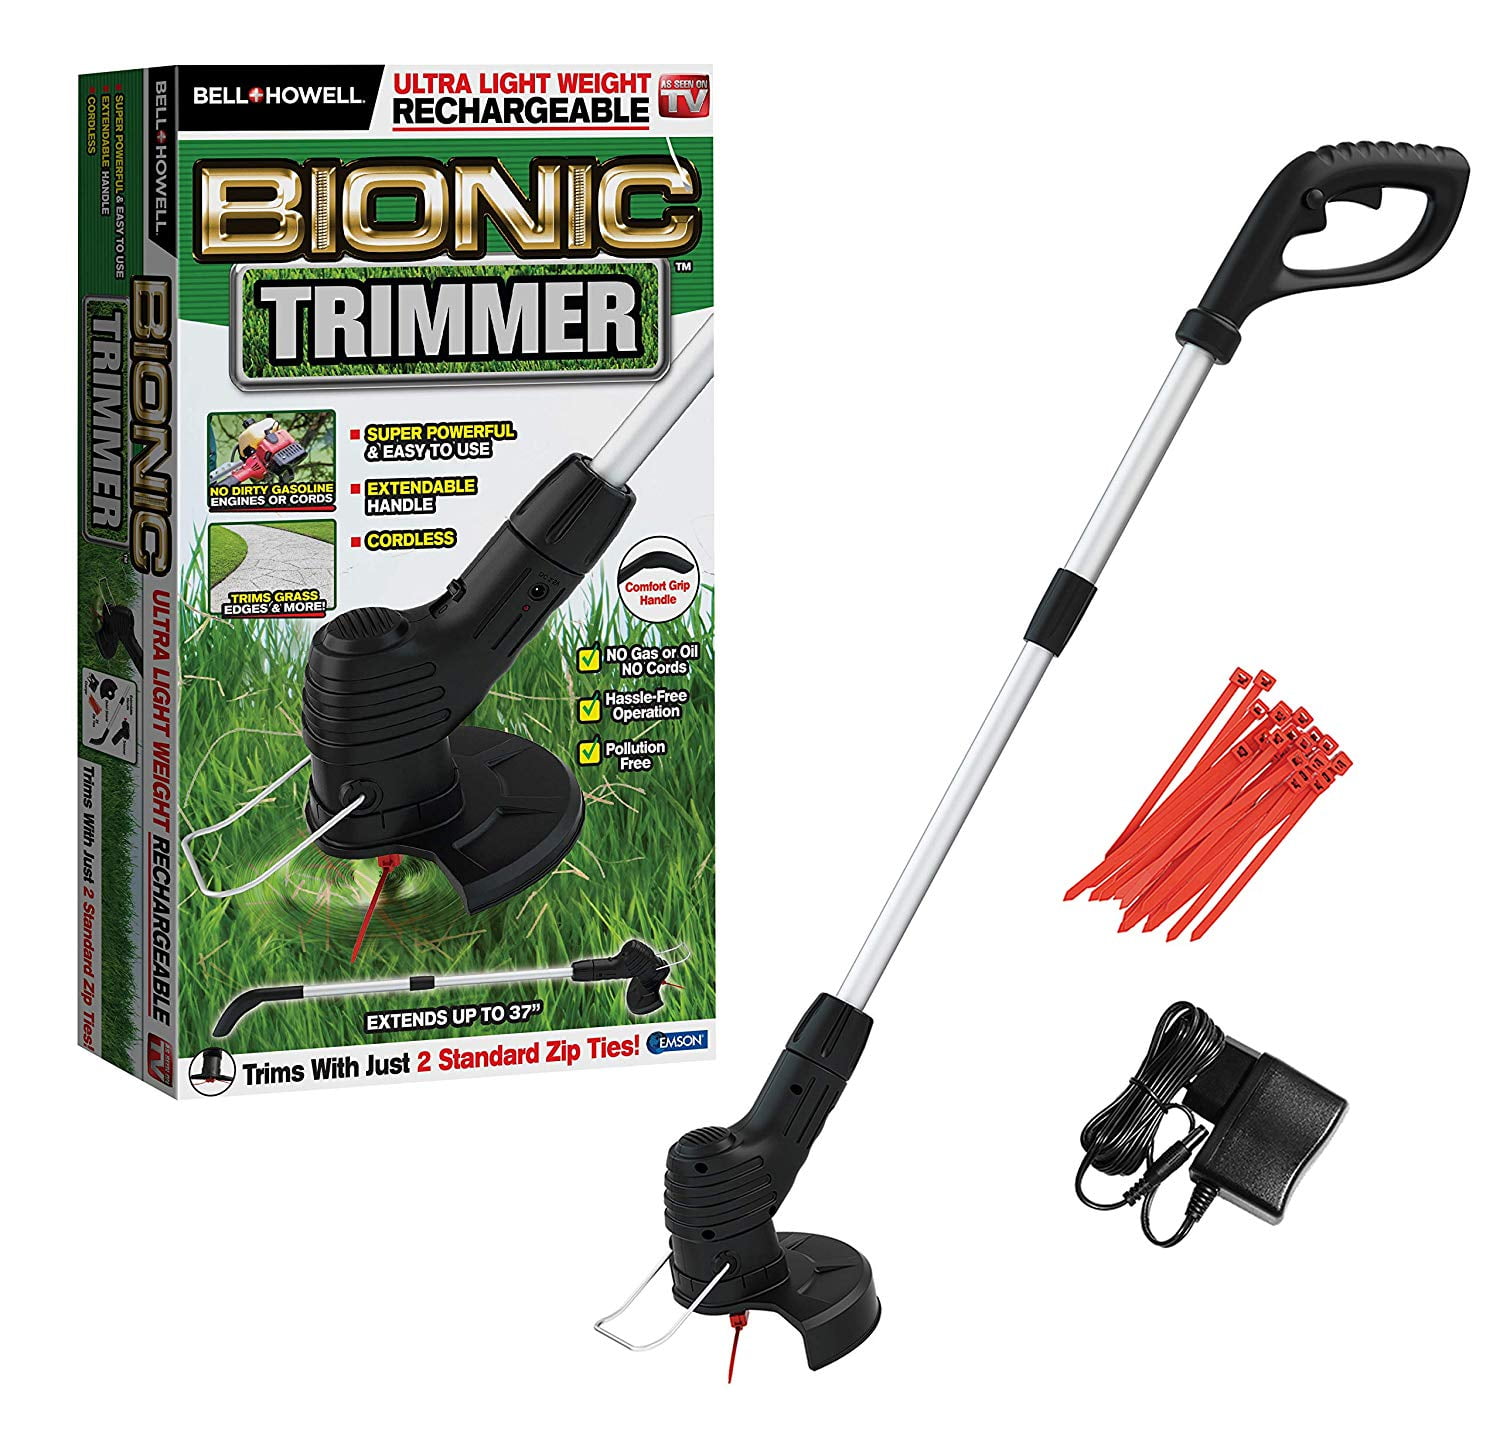 Photo 1 of 2 PACK Bionic Trimmer - The Rechargeable Portable Garden Trimmer Weed Wacker, Foldable Ultra Compact, As Seen on TV